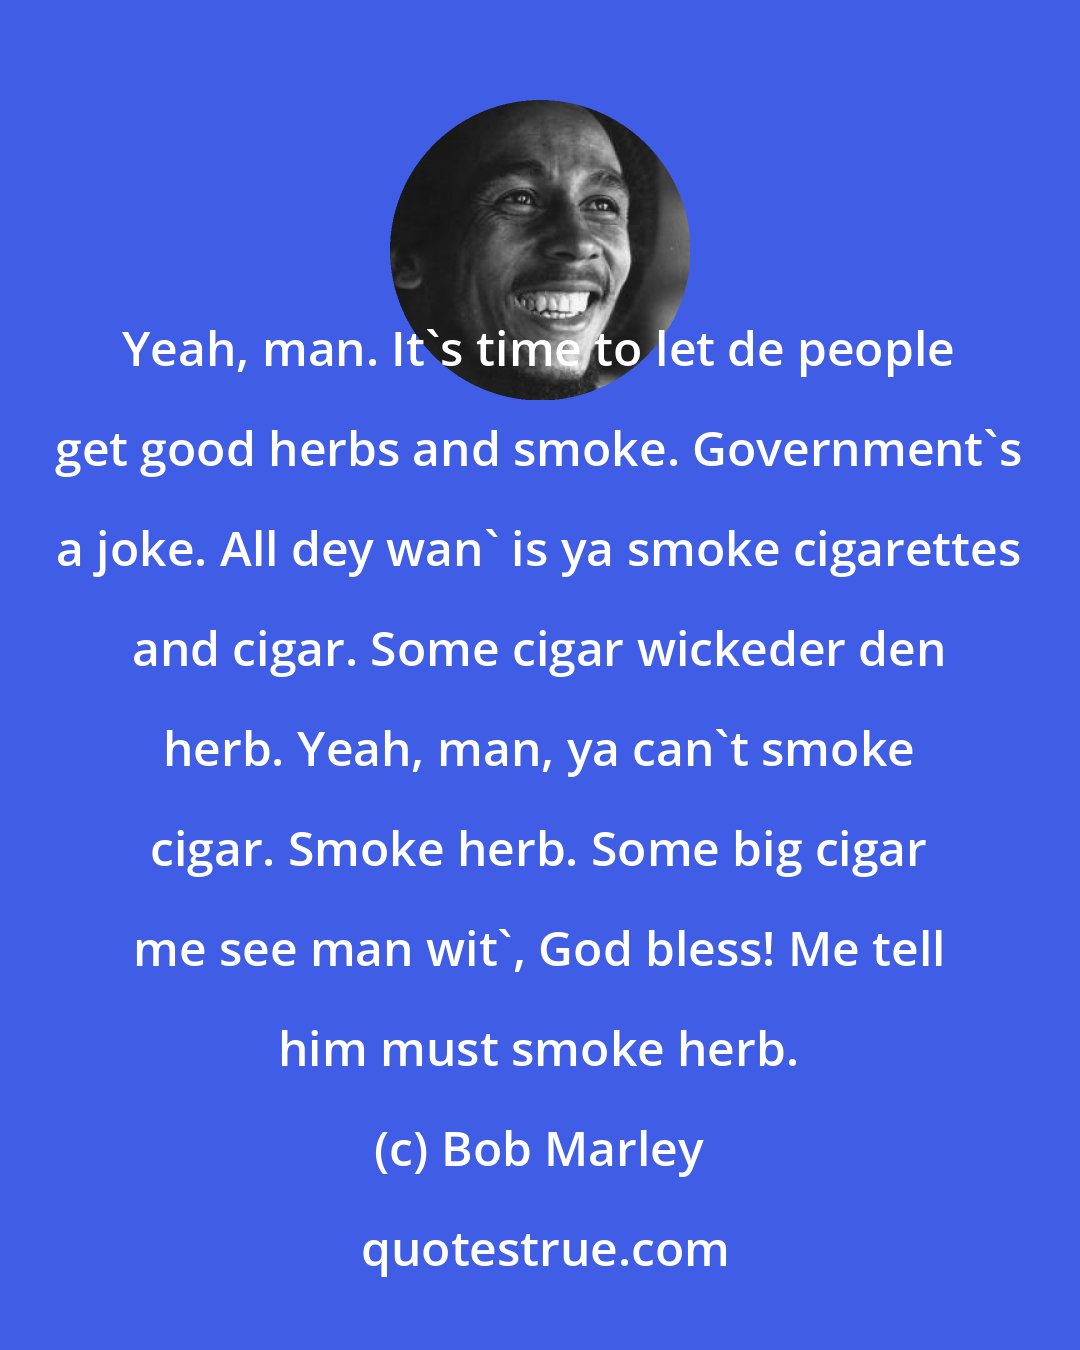 Bob Marley: Yeah, man. It's time to let de people get good herbs and smoke. Government's a joke. All dey wan' is ya smoke cigarettes and cigar. Some cigar wickeder den herb. Yeah, man, ya can't smoke cigar. Smoke herb. Some big cigar me see man wit', God bless! Me tell him must smoke herb.